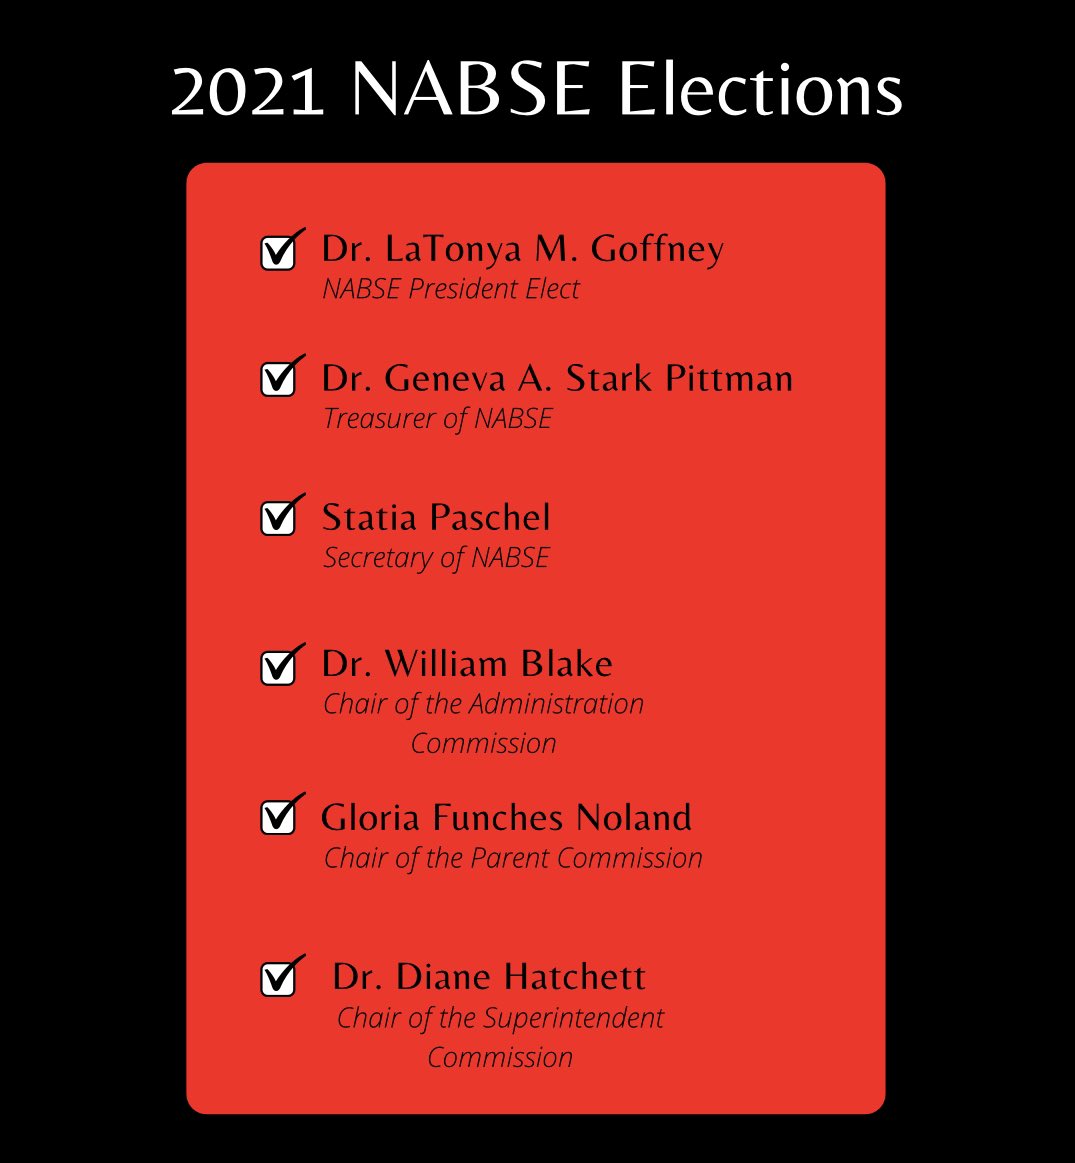 Congratulations to all of NABSE’s newly elected leaders. We look forward to the benefits of your service!